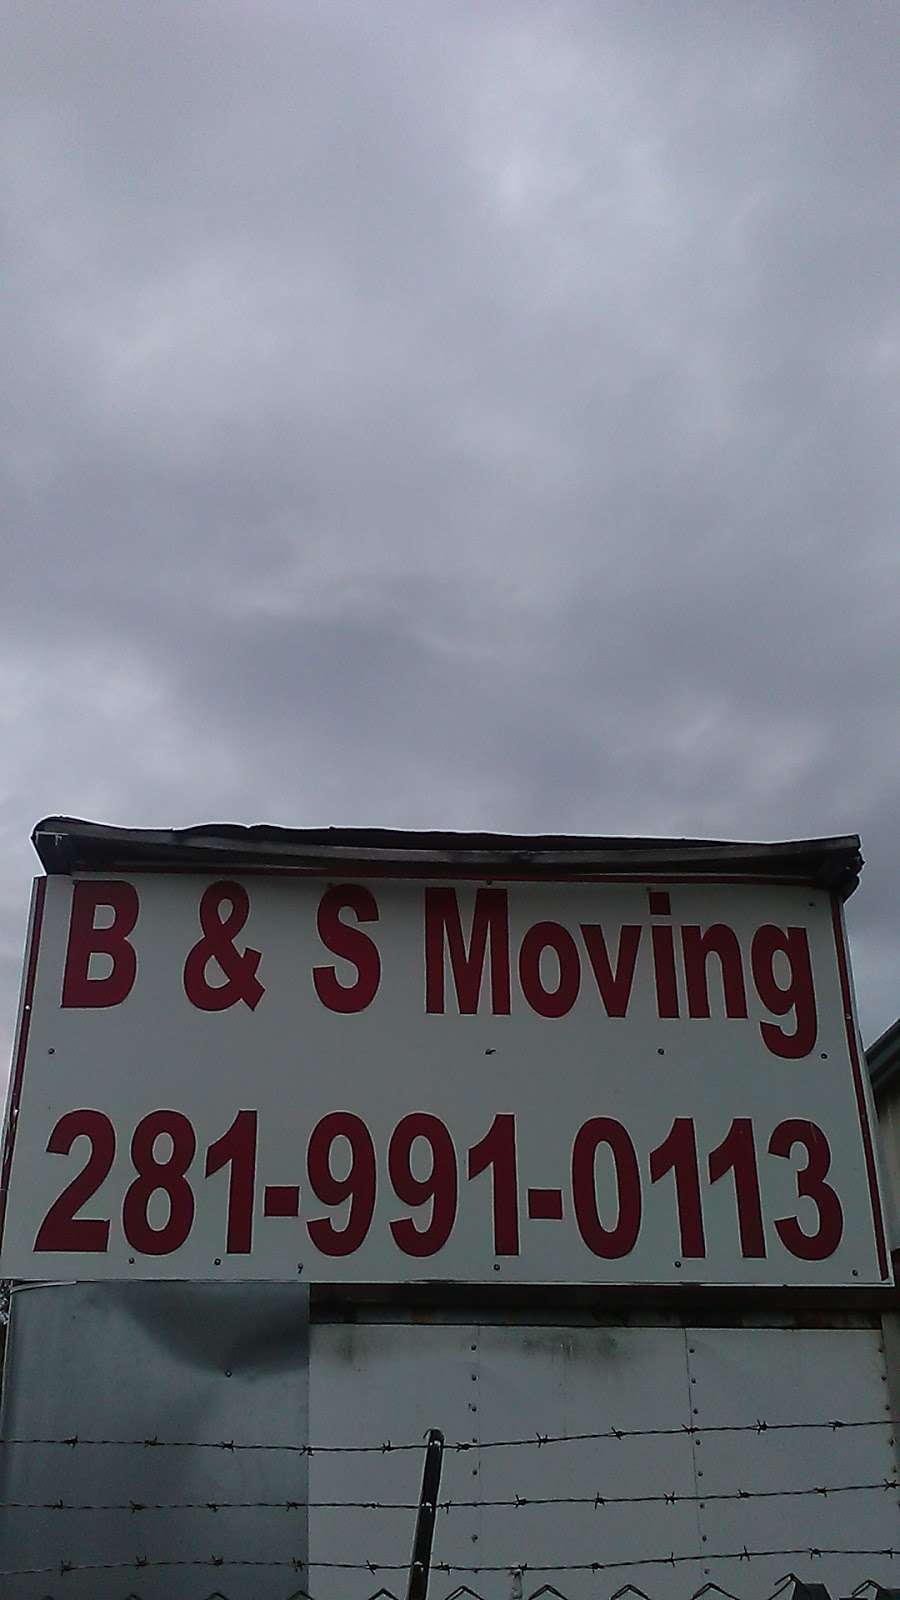 B & S Moving & Delivery | 4830 Red Bluff Rd, Pasadena, TX 77503, USA | Phone: (281) 991-0113